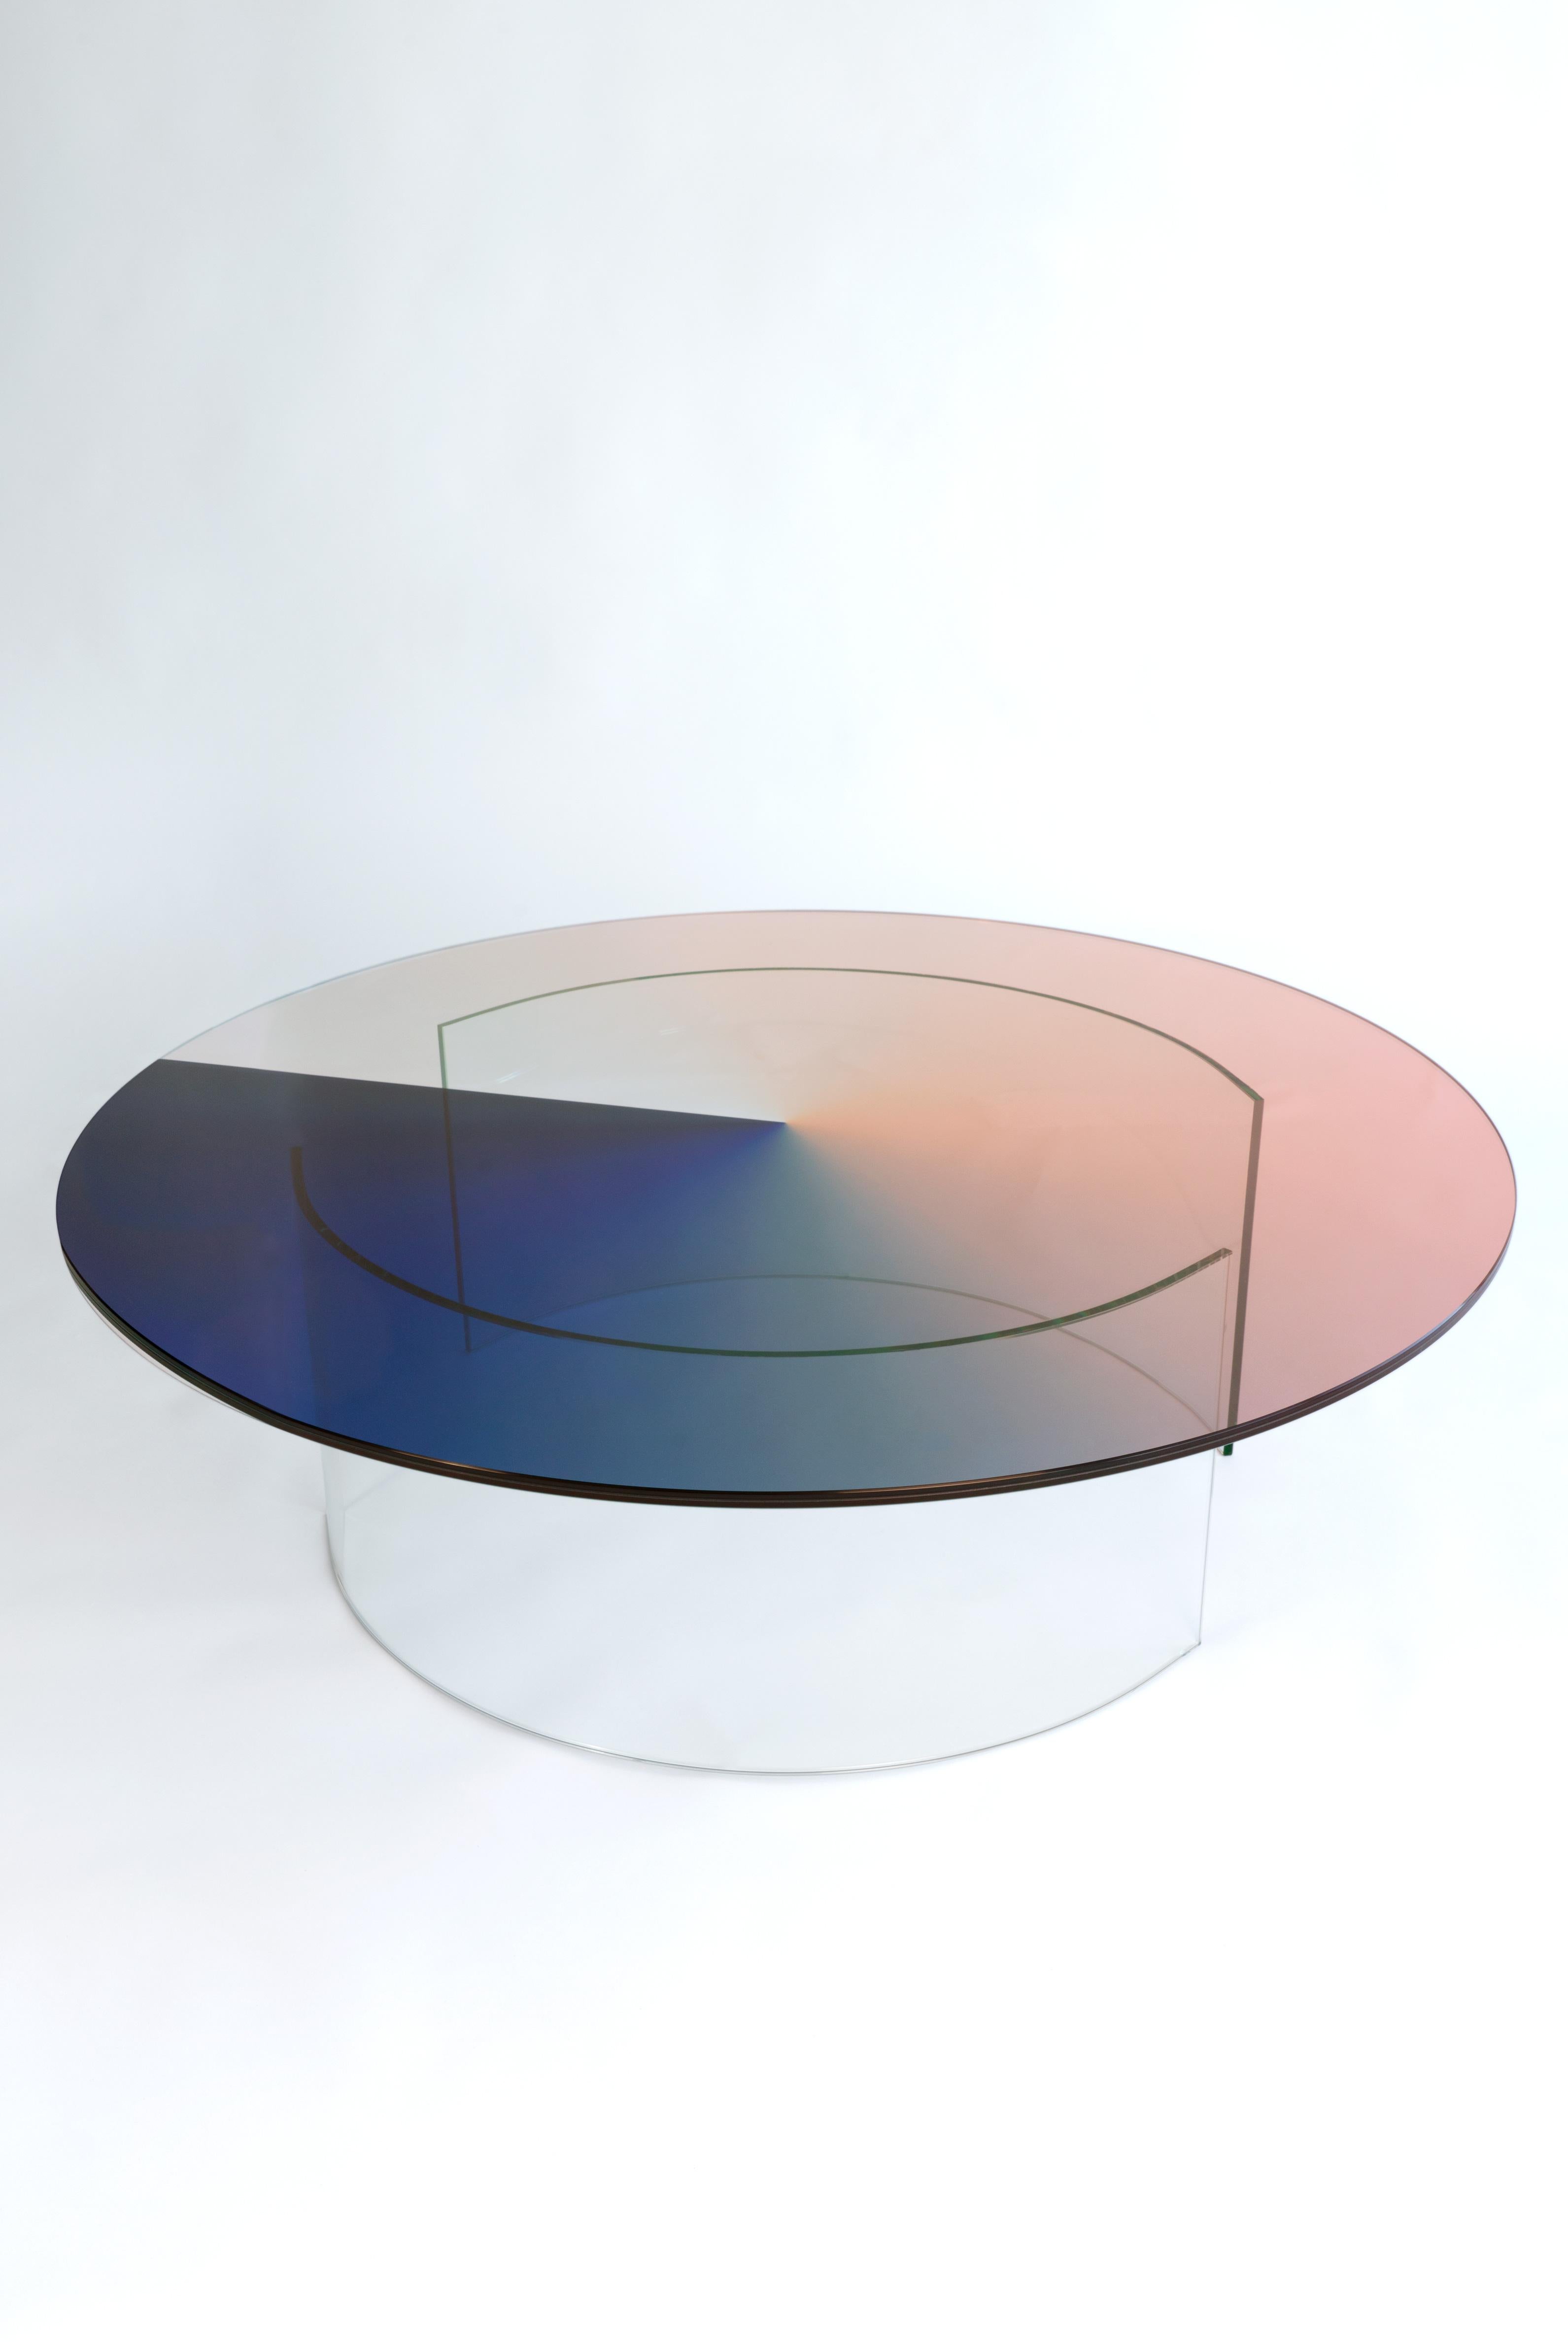 Colour Dial Curved table - Art by Rive Roshan